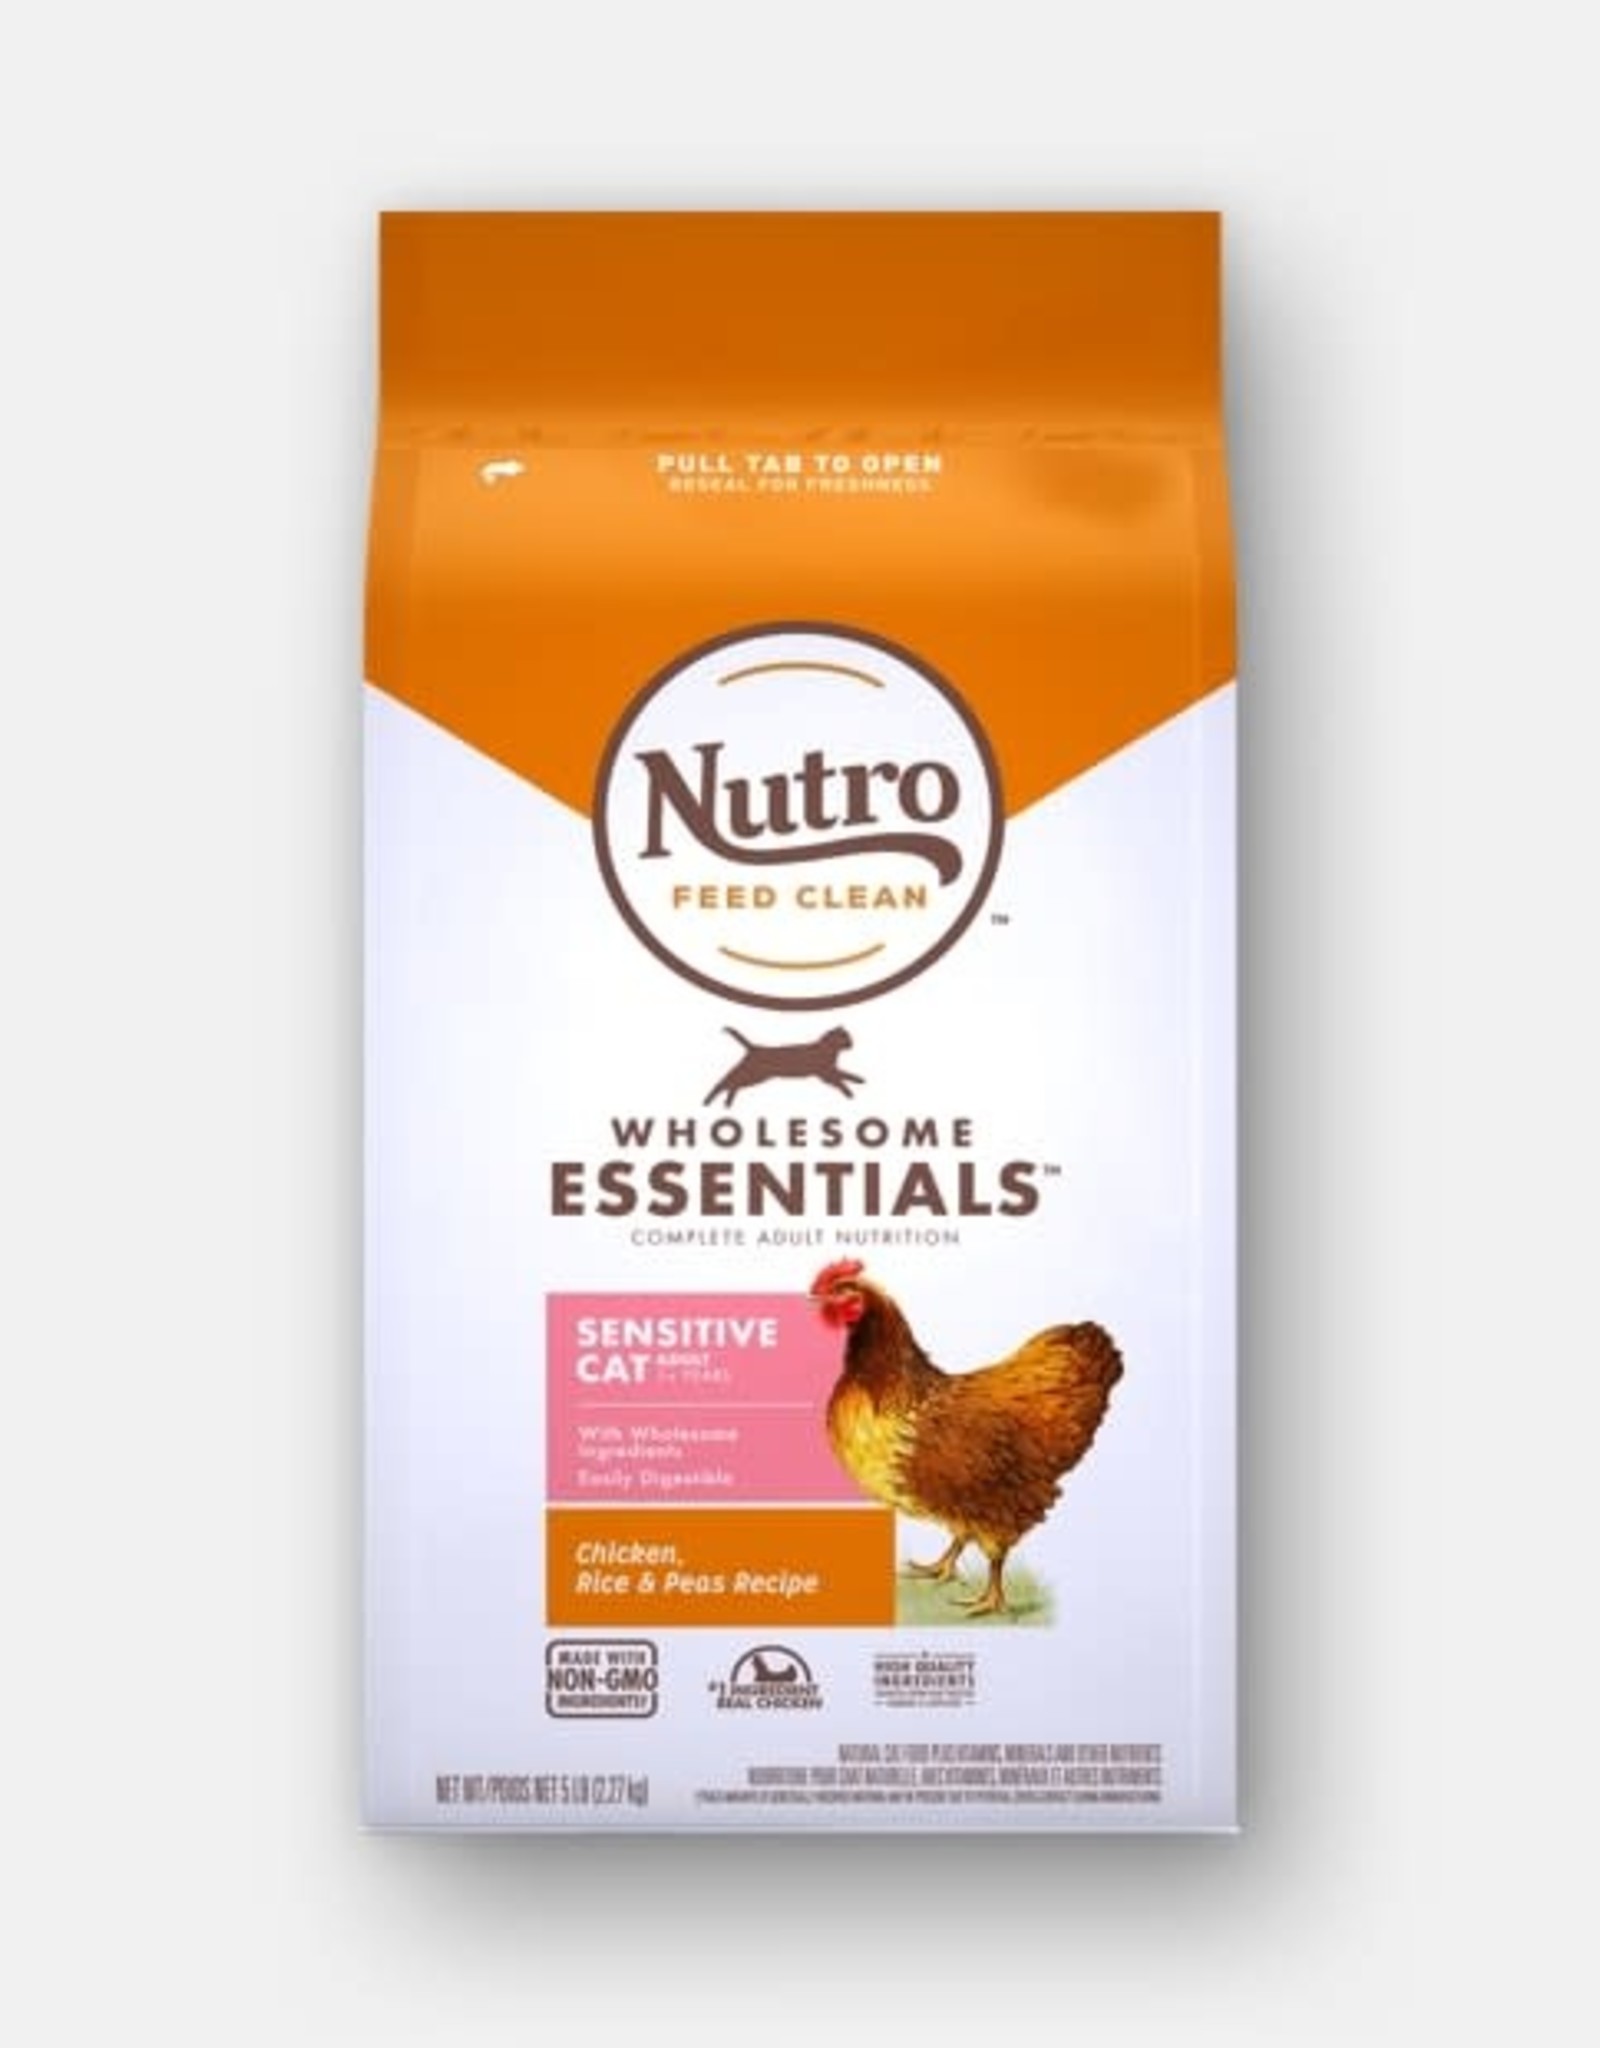 NUTRO PRODUCTS  INC. NUTRO WHOLESOME ESSENTIALS SENSITIVE CAT CHICKEN 5LBS